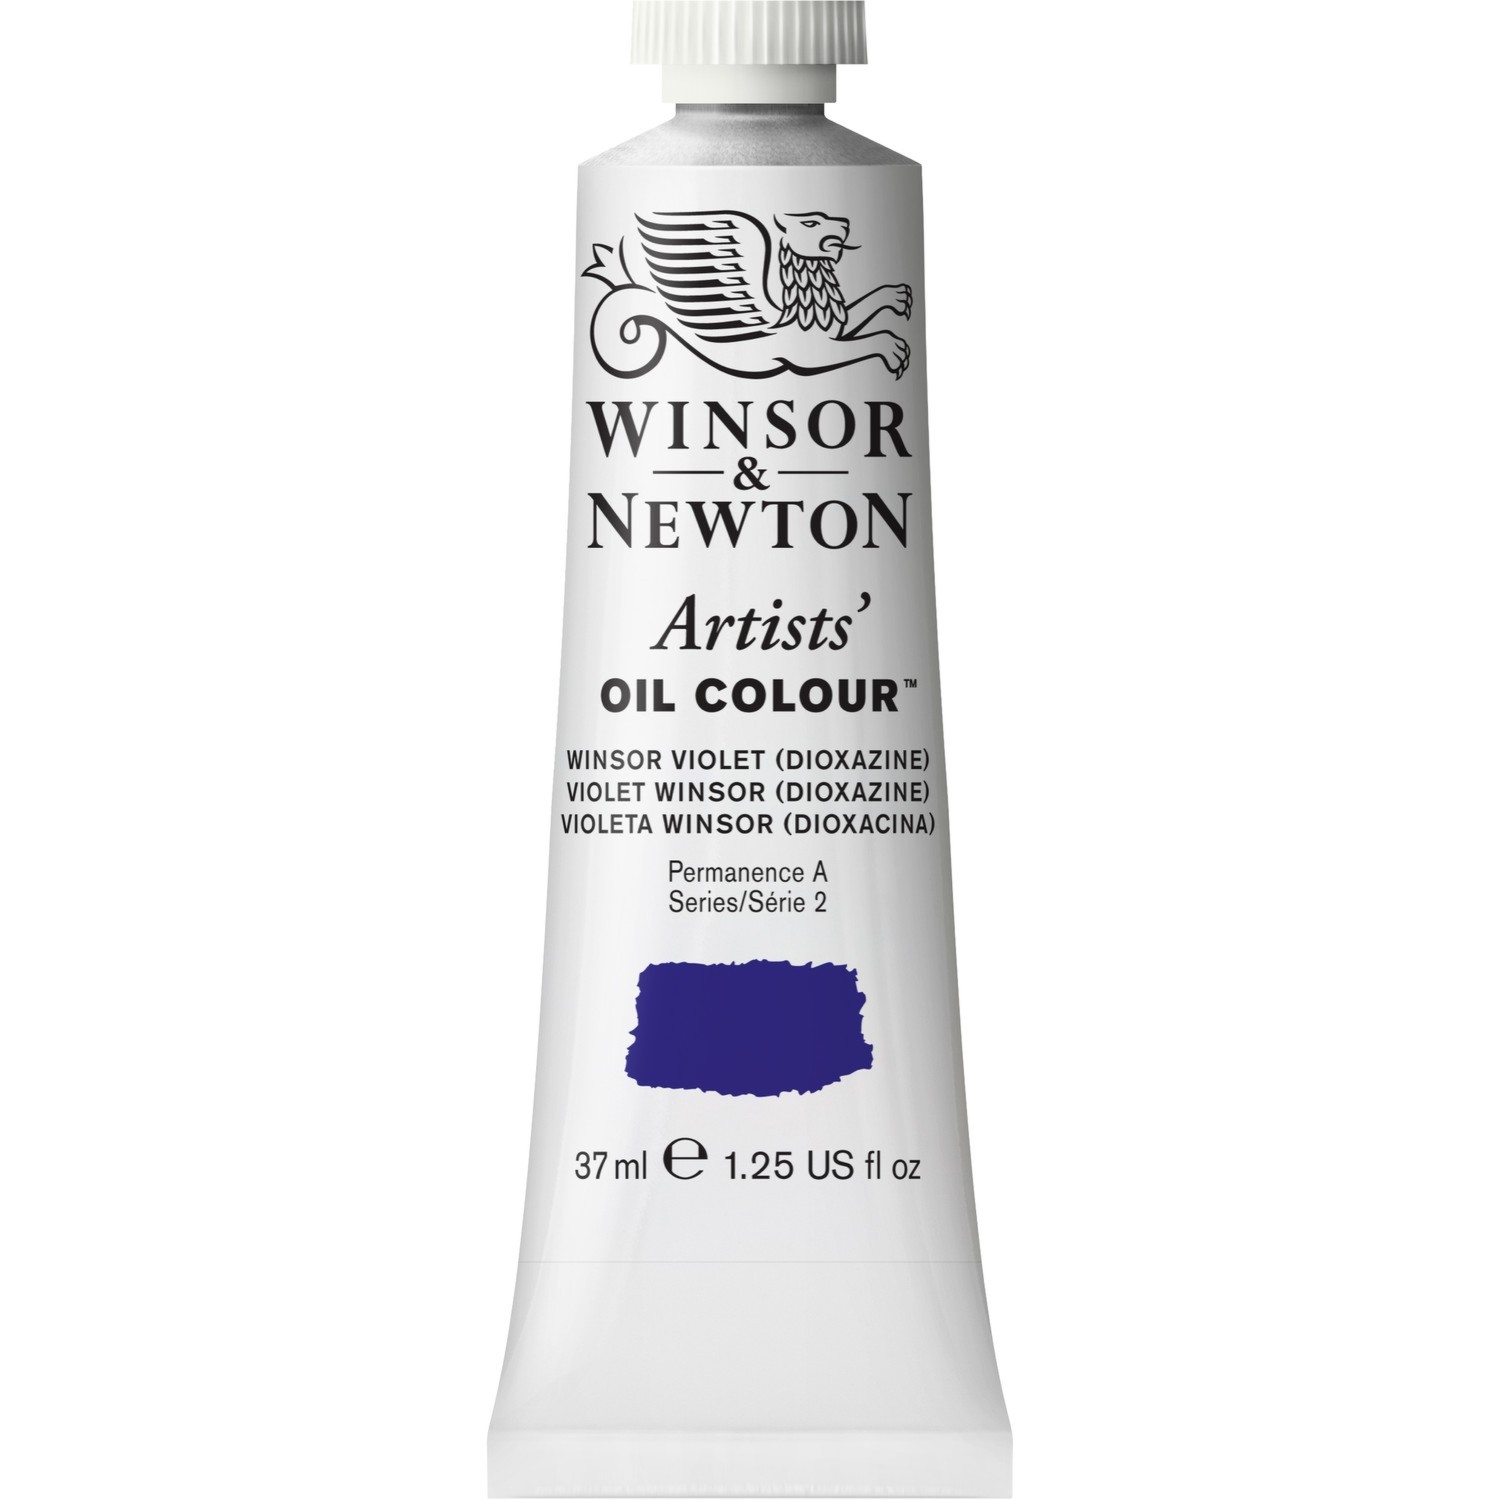 Winsor and Newton 37ml Artists' Oil Colours - Winsor Vio Diox Image 1